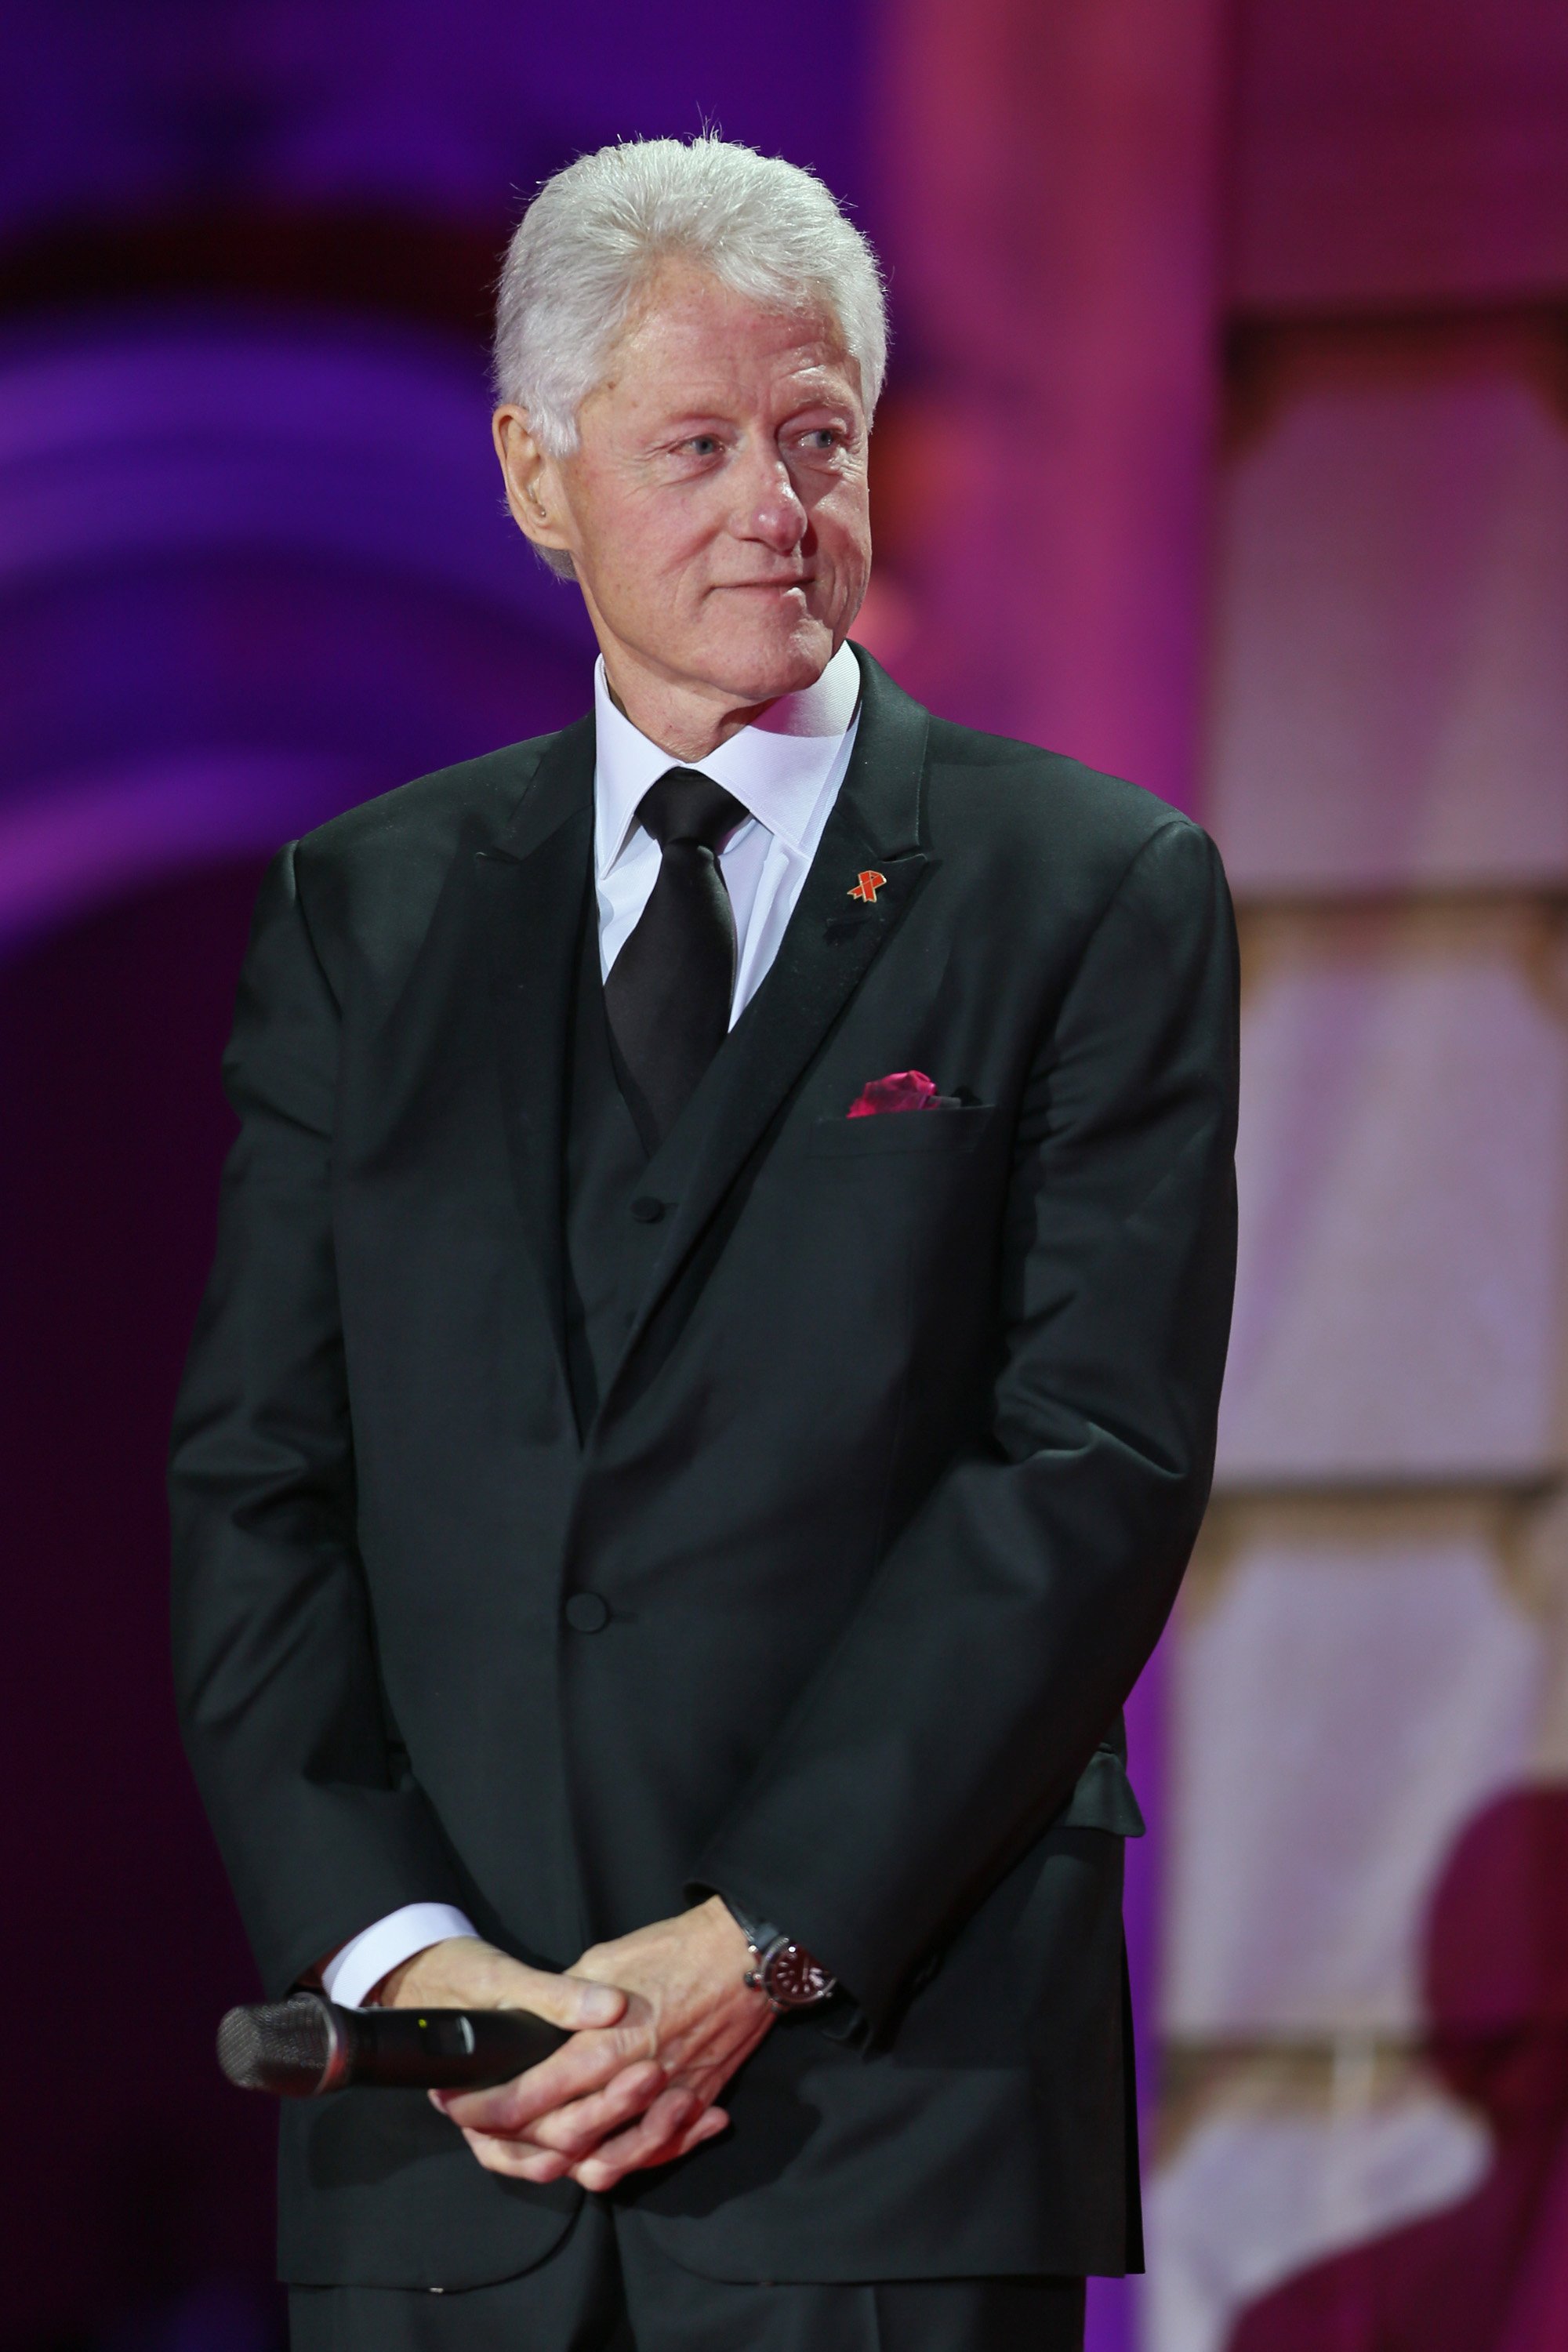 Bill Clinton attends the 'Life Ball 2013 - Show' on May 25, 2013, in Vienna, Austria. | Source: Getty Images.